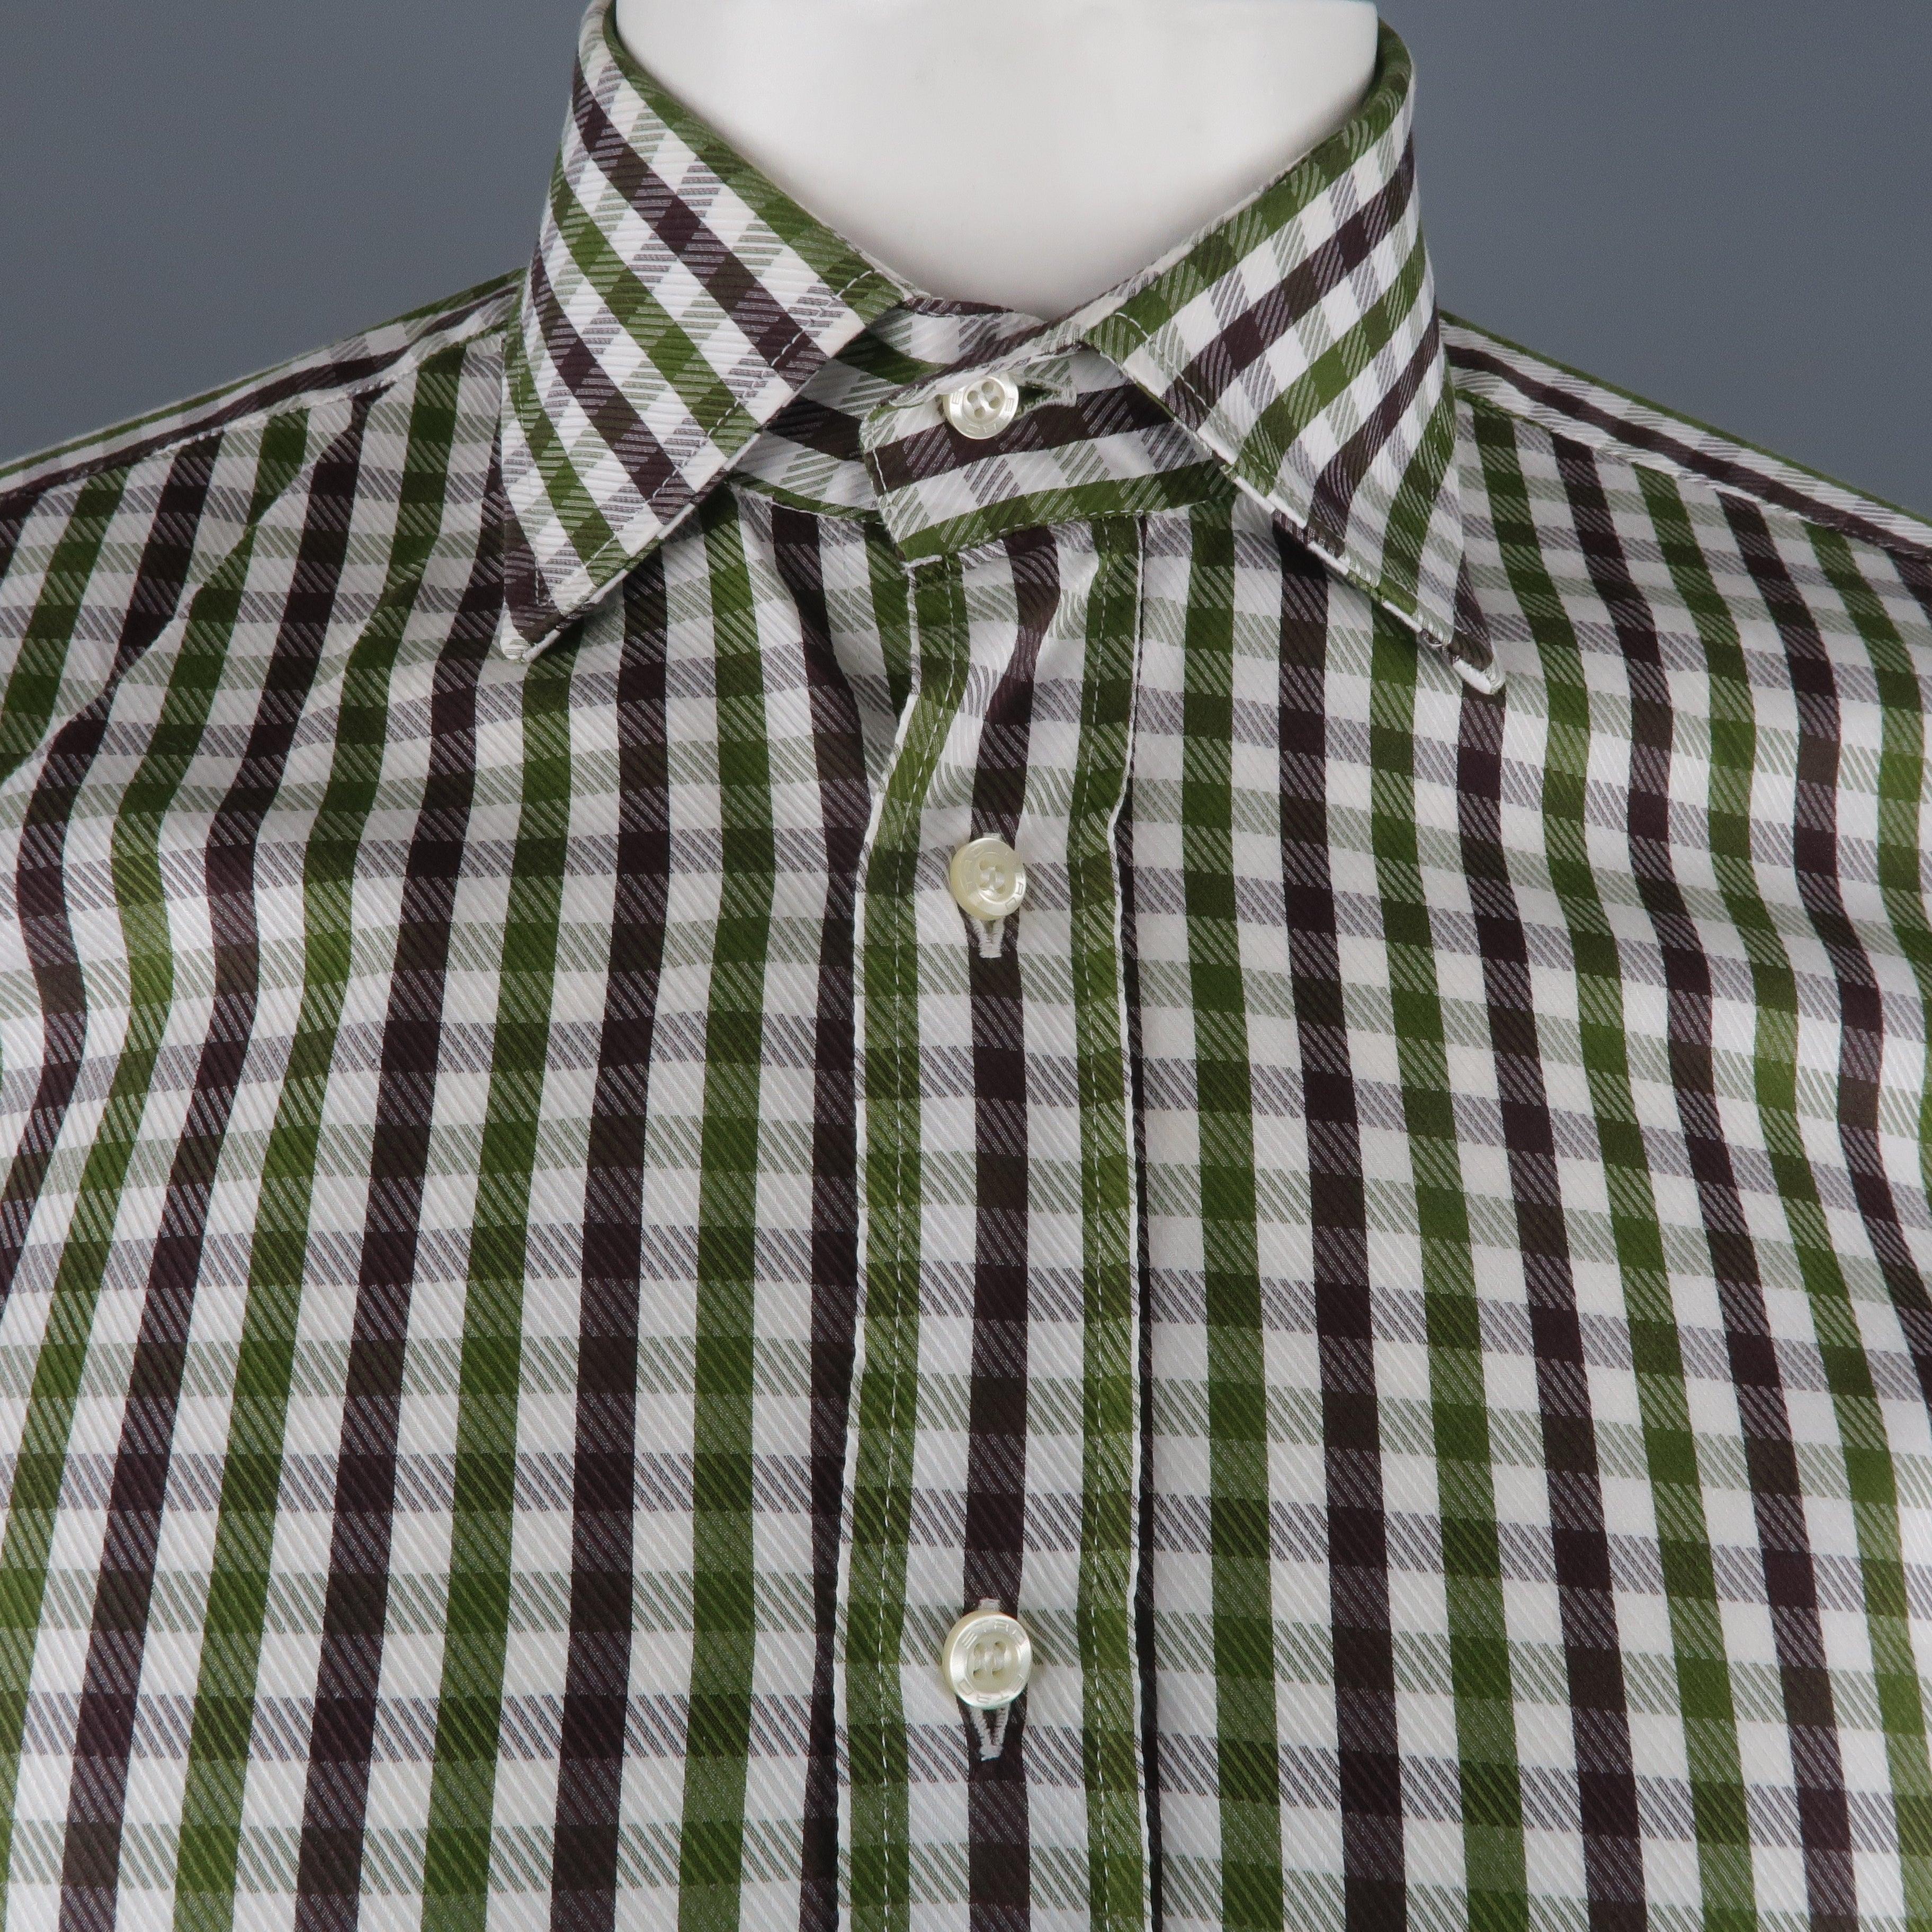 ETRO long sleeve shirt comes in a white and green checkered cotton featuring a spread collar. Made in Italy. 
Very Good Pre-Owned Condition.
 

Marked:   39
 

Measurements: 
  
l	Shoulder: 17.5 inches  
l	Chest: 45 inches  
l	Sleeve: 25.5 inches 